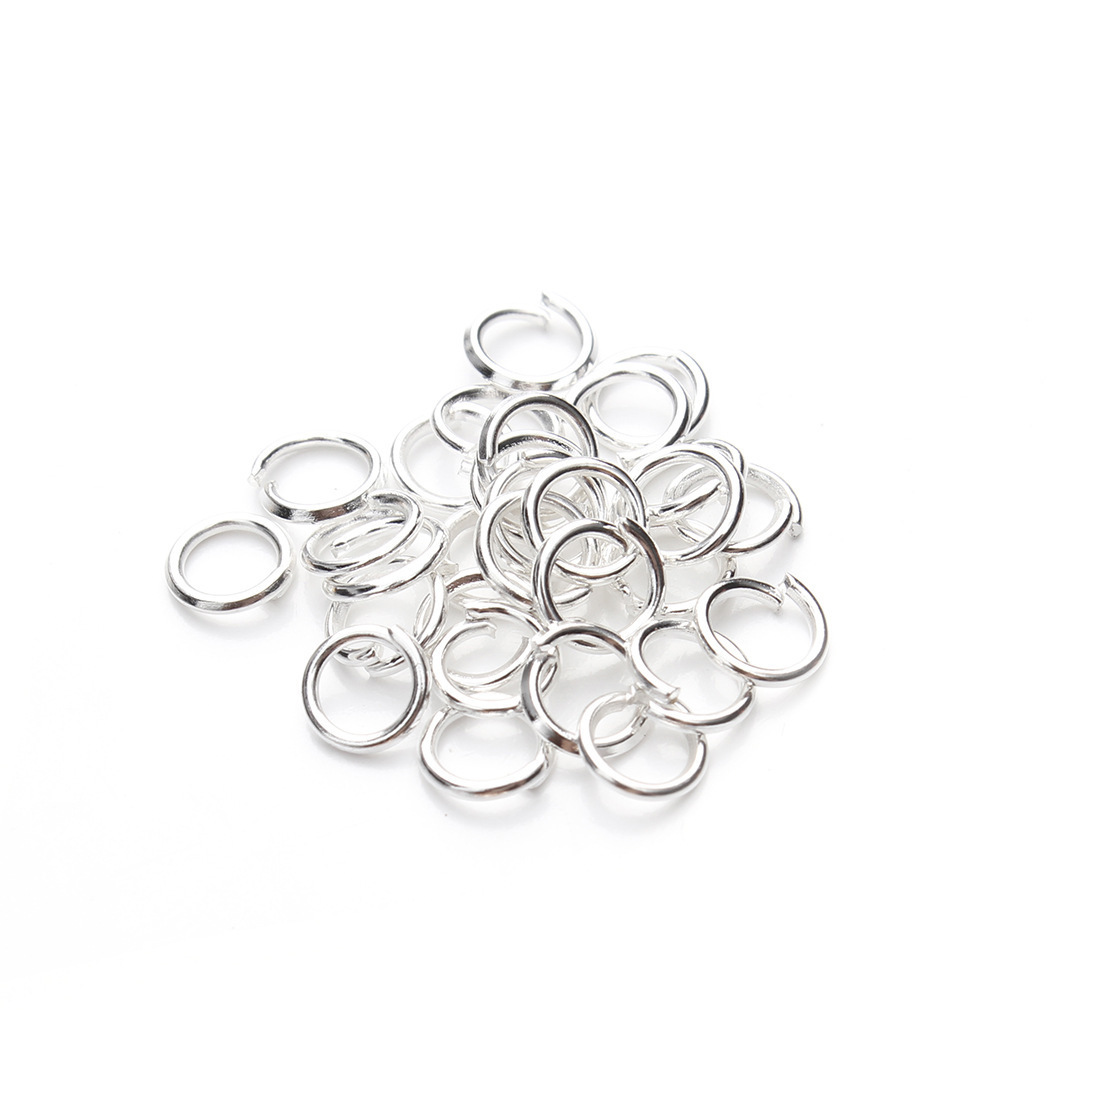 Silver outer diameter 16mm